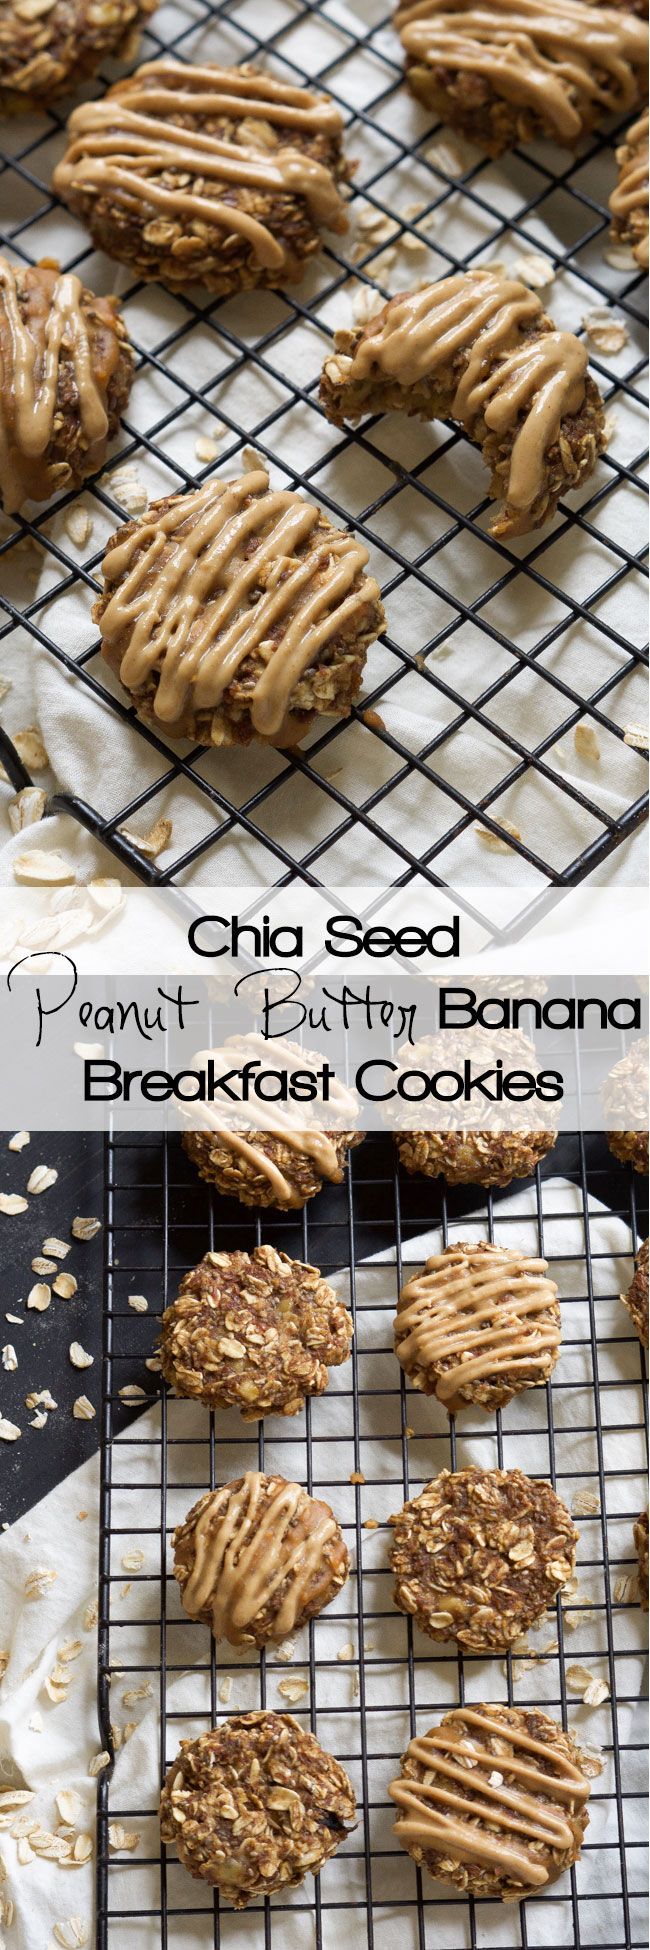 Peanut Butter Banana Breakfast Cookies are ready in 15 minutes, only take one bowl and are a delicious and dessert-like breakfast